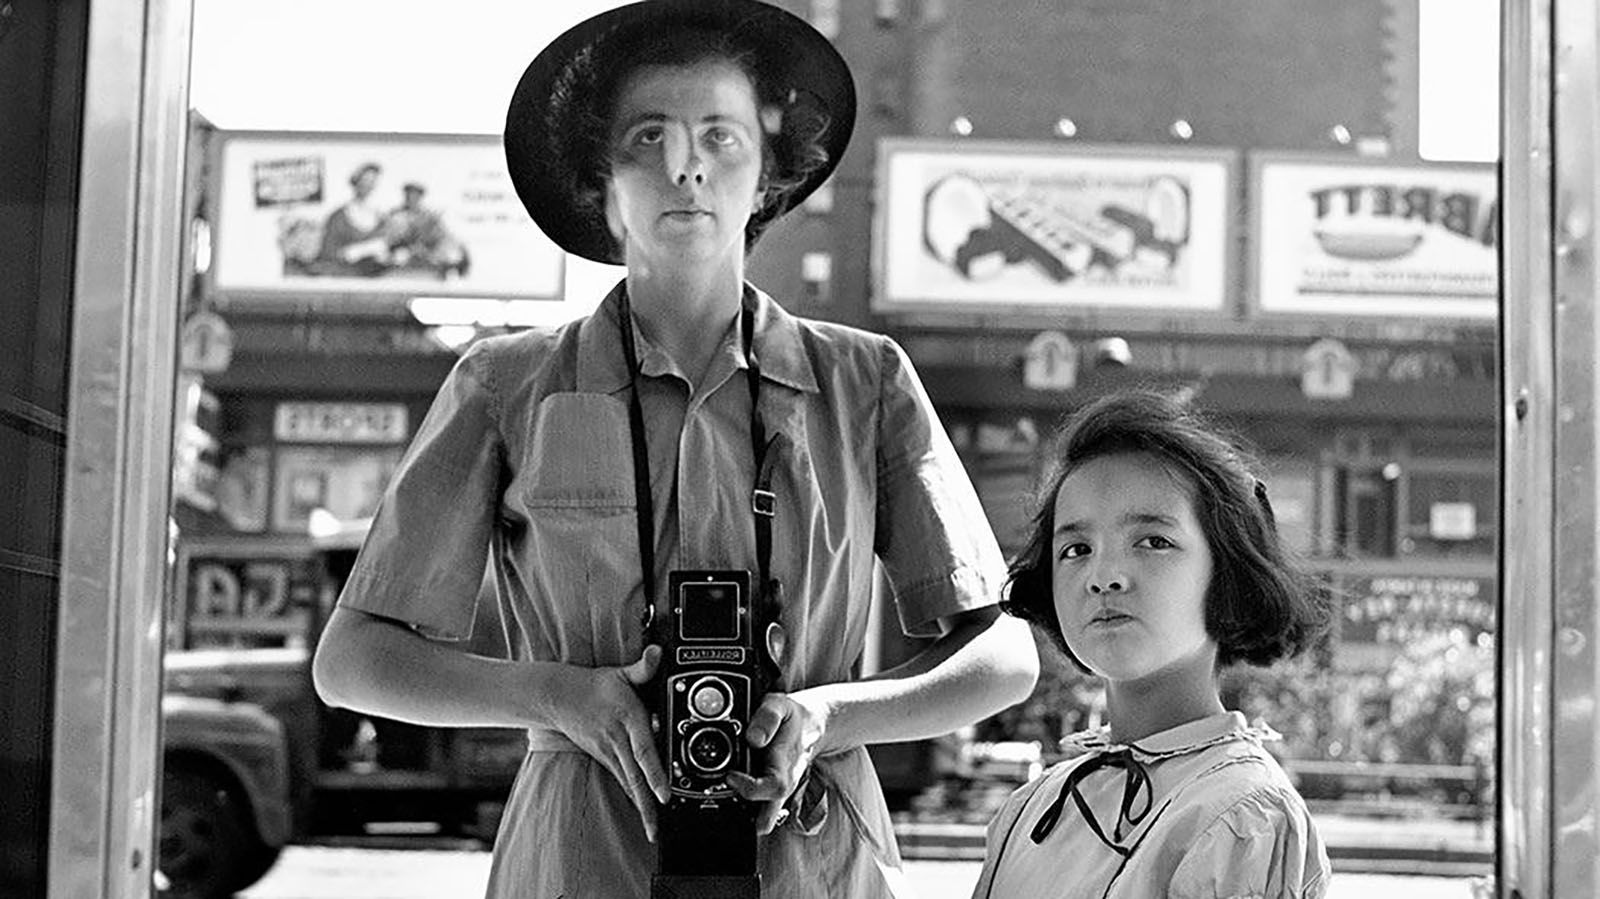 Cinema Center will show a free screening of the documentary Finding Vivian Maier on March 24. Maier’s photos are at the Garrett Museum of Art through March 26.